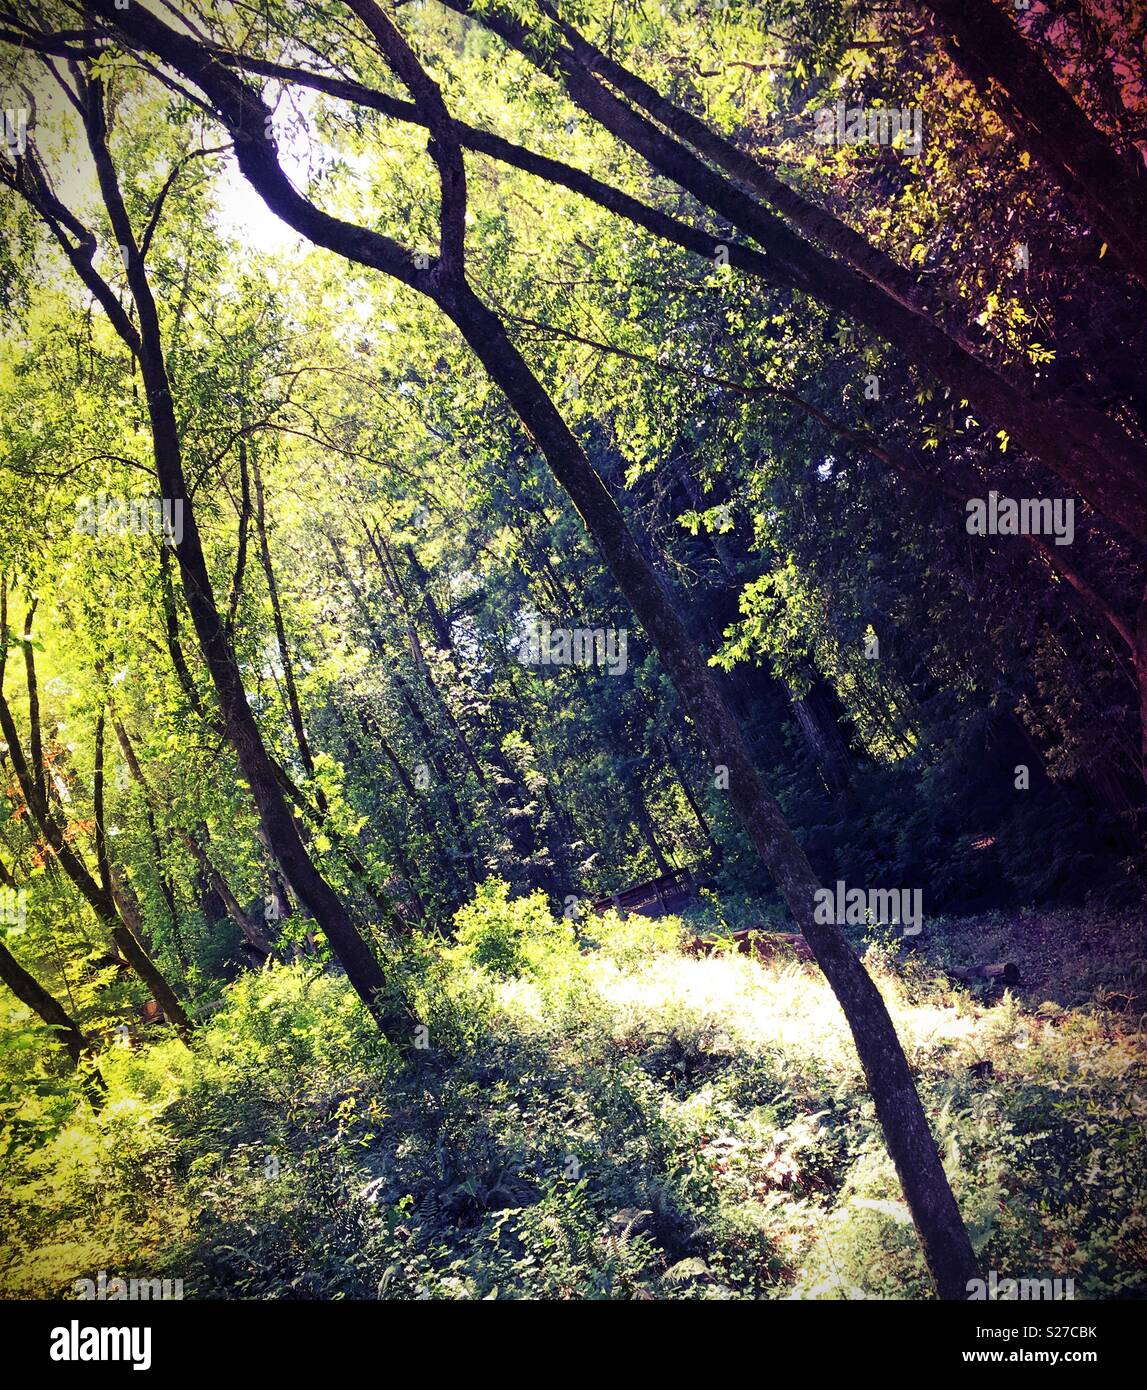 A wooded area. Stock Photo